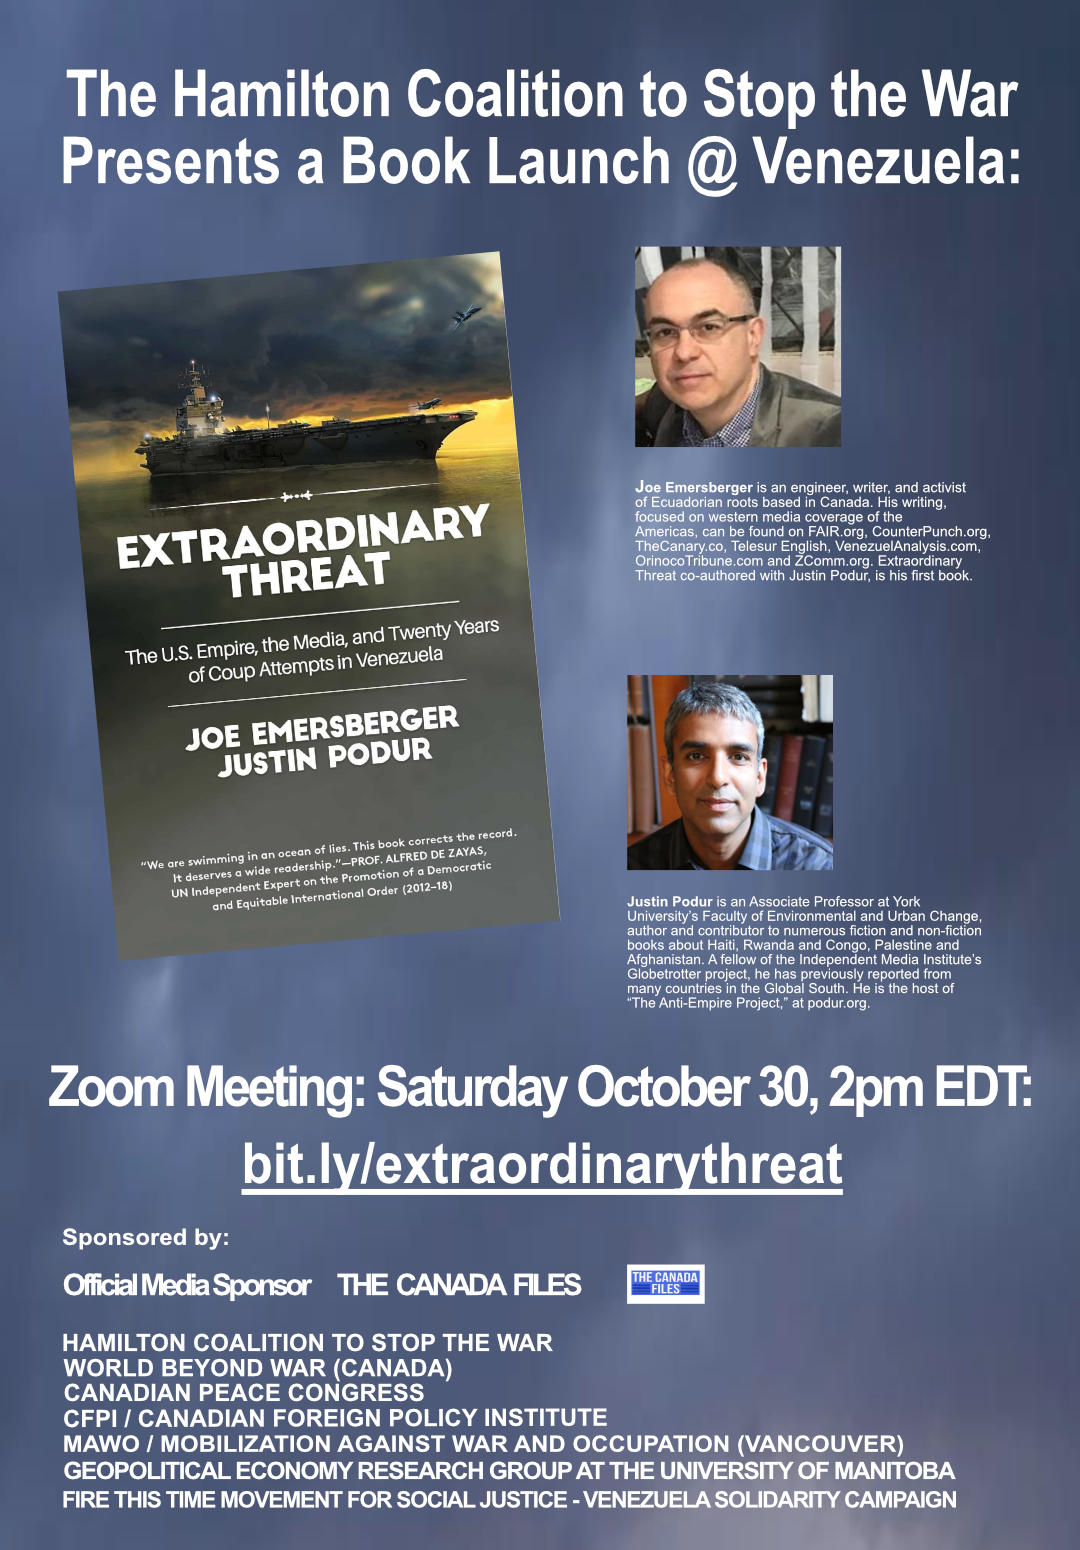 Book-Launch Poster for "Extraordinary Threat"